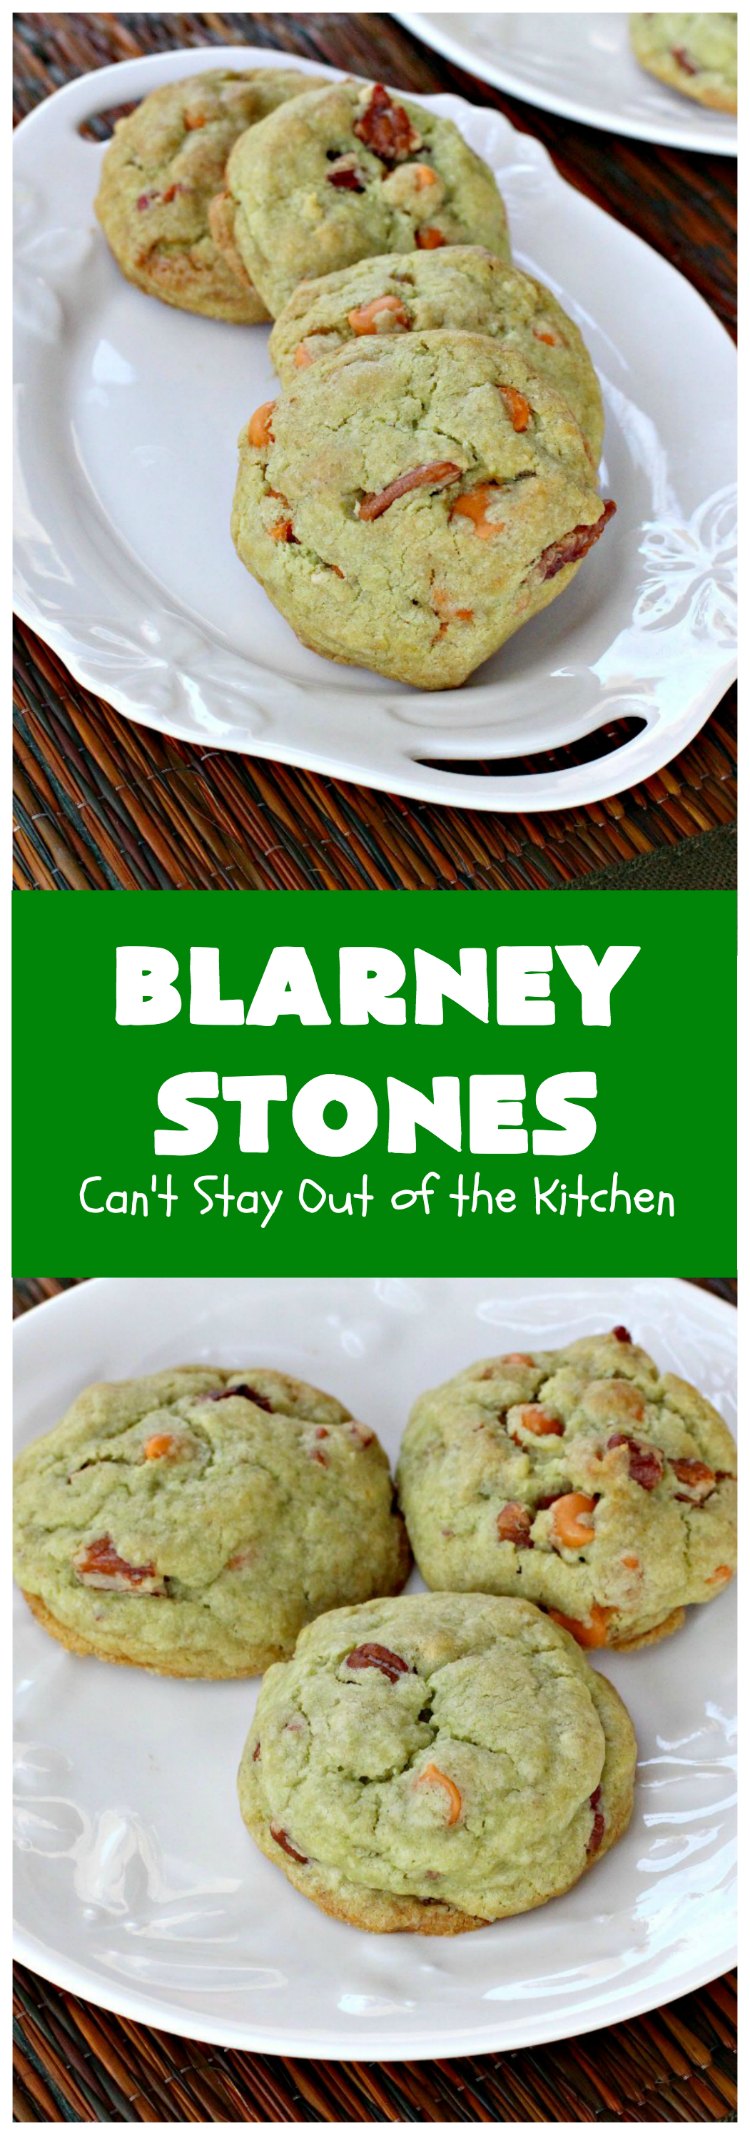 Blarney Stones | Can't Stay Out of the Kitchen